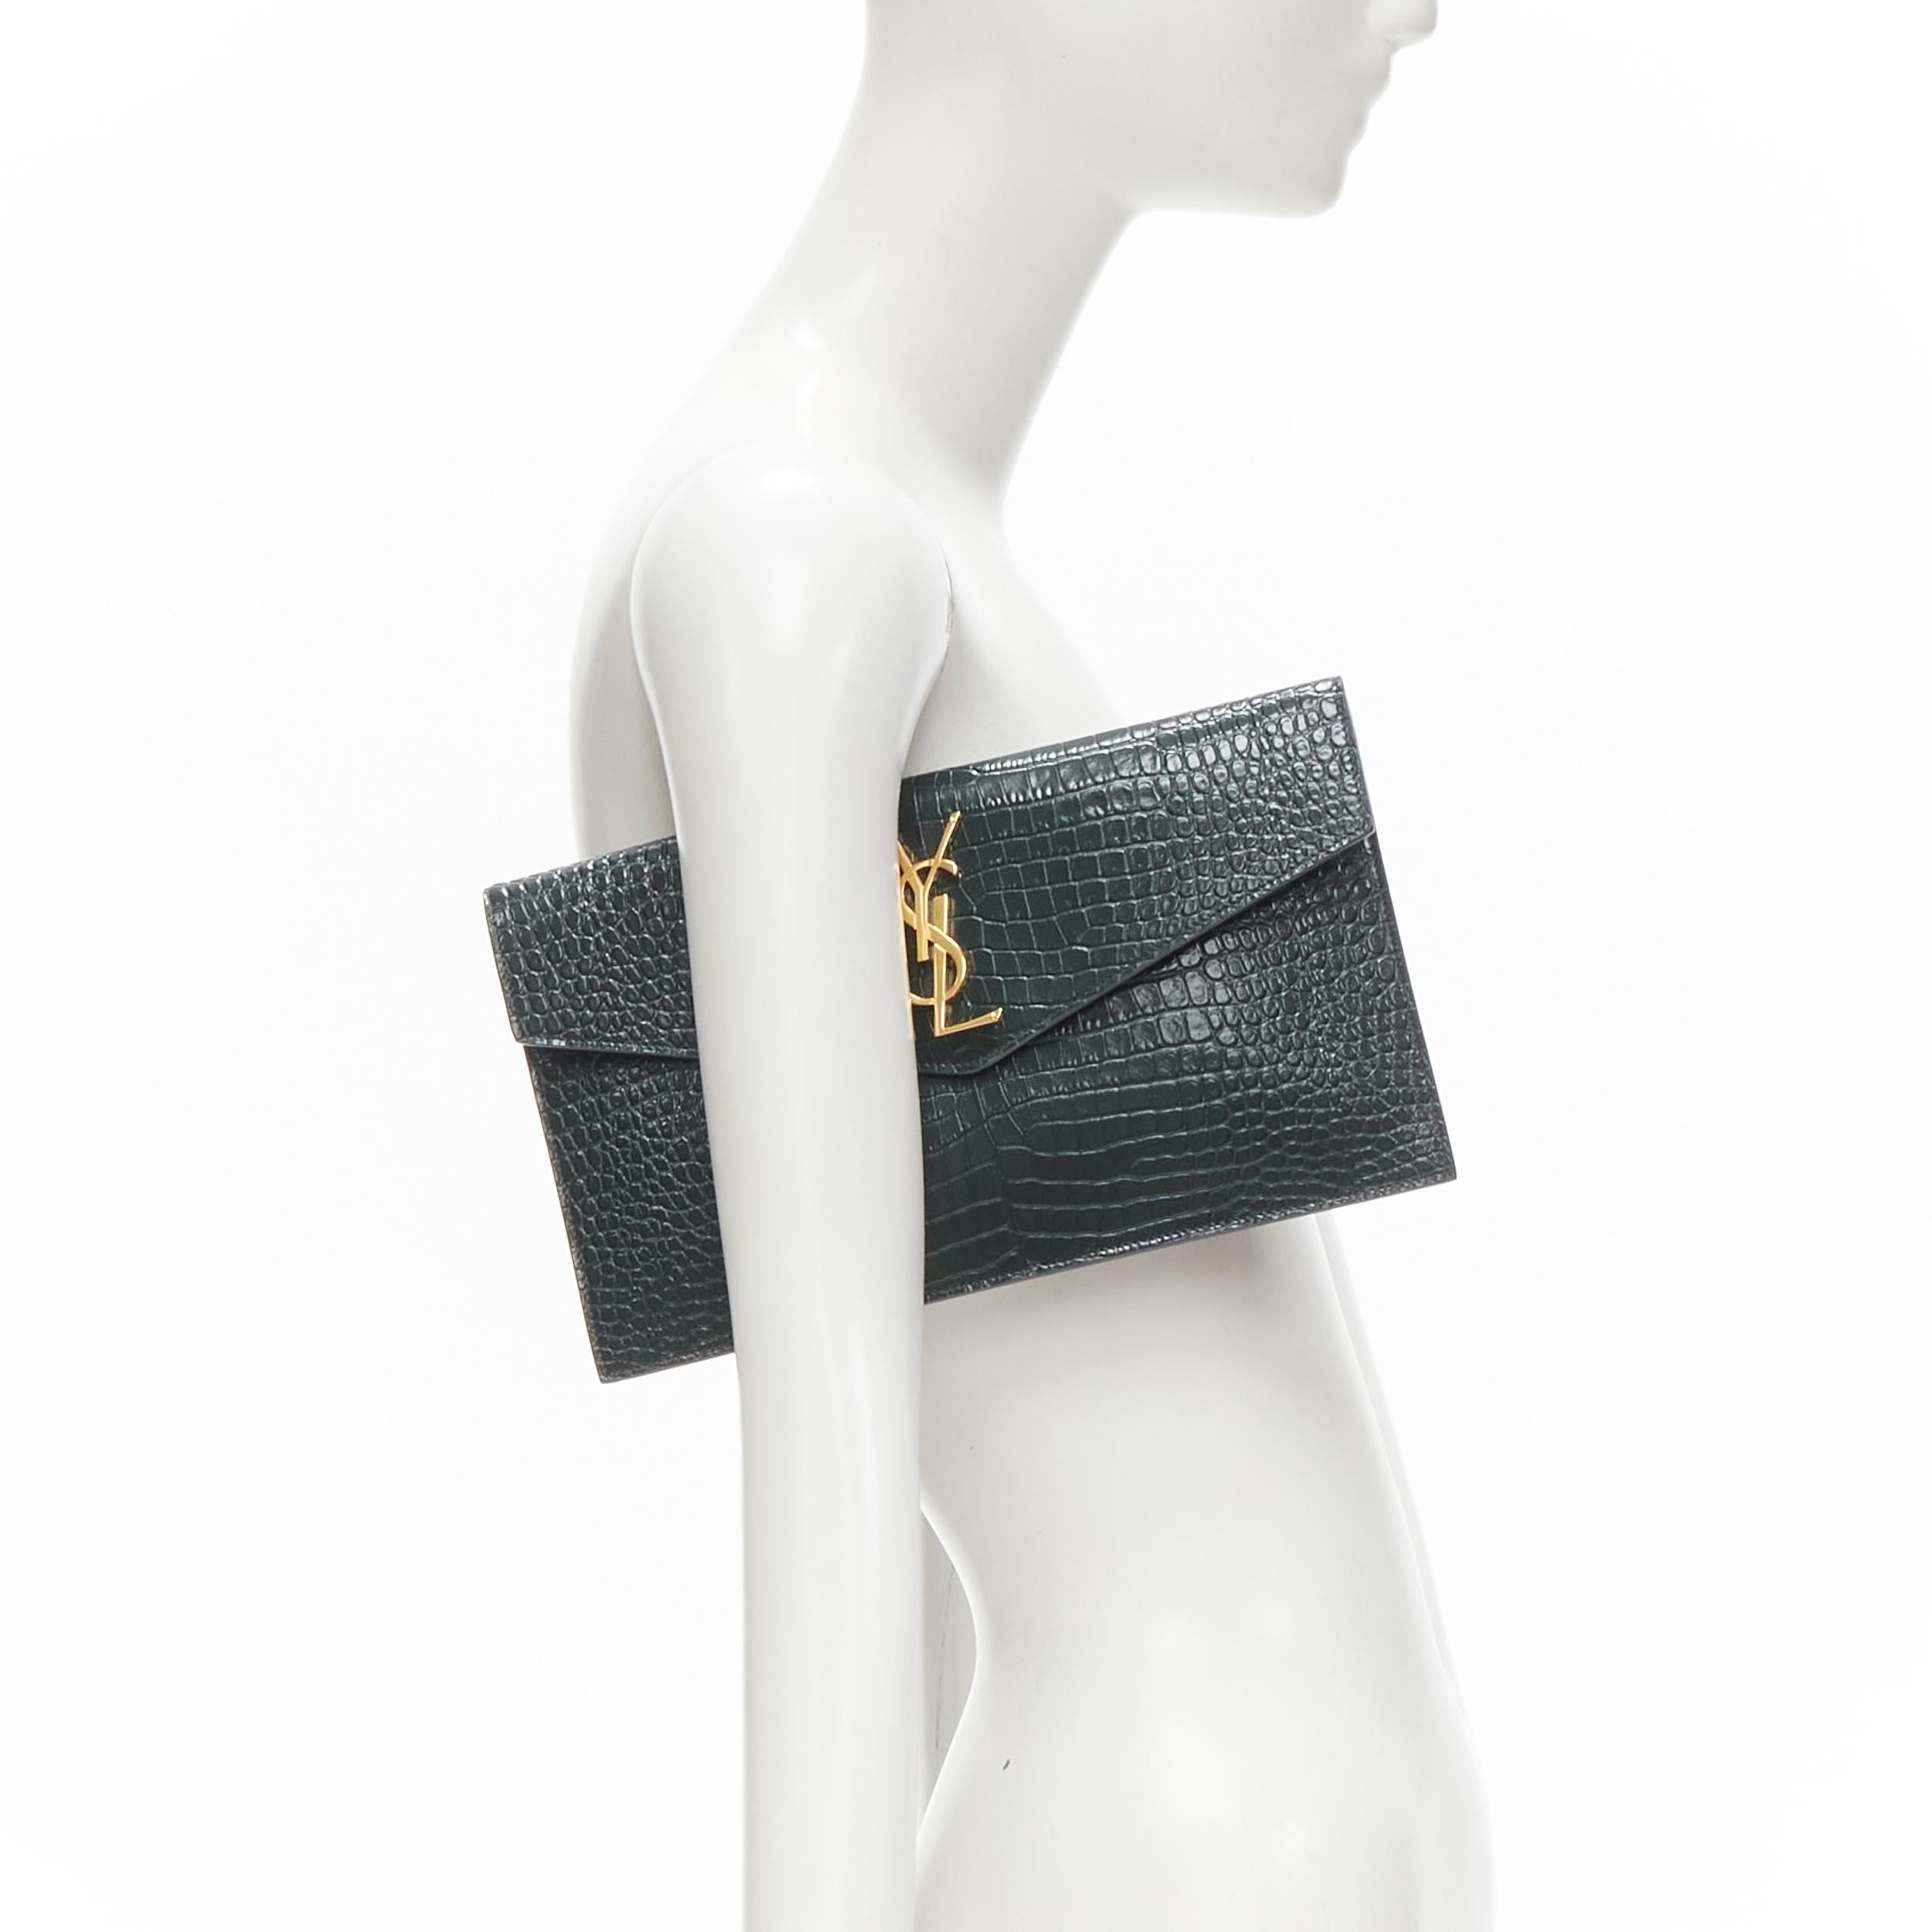 new SAINT LAURENT Uptown green croc embossed gold YSL logo envelope clutch bag 
Reference: AEMA/A00104
Brand: Saint Laurent 
Collection: Uptown 
Material: Leather 
Color: Green 
Pattern: Solid 
Closure: Magnet 


CONDITION:
Condition: New with